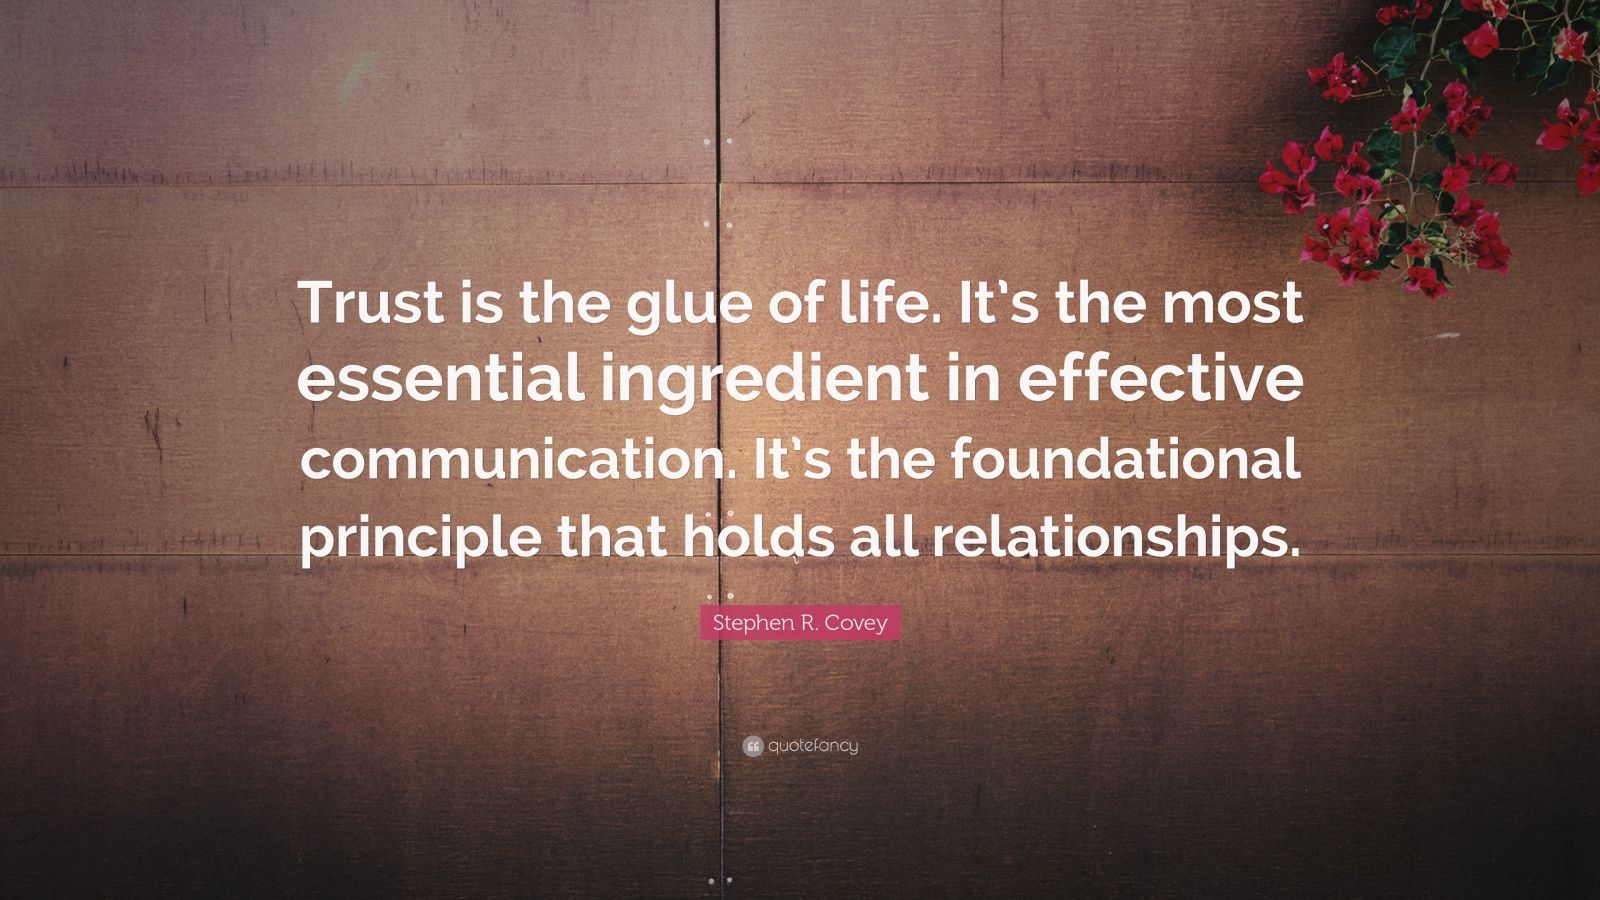 Relationship Quotes “Trust is the glue of life It s the most essential ingre nt